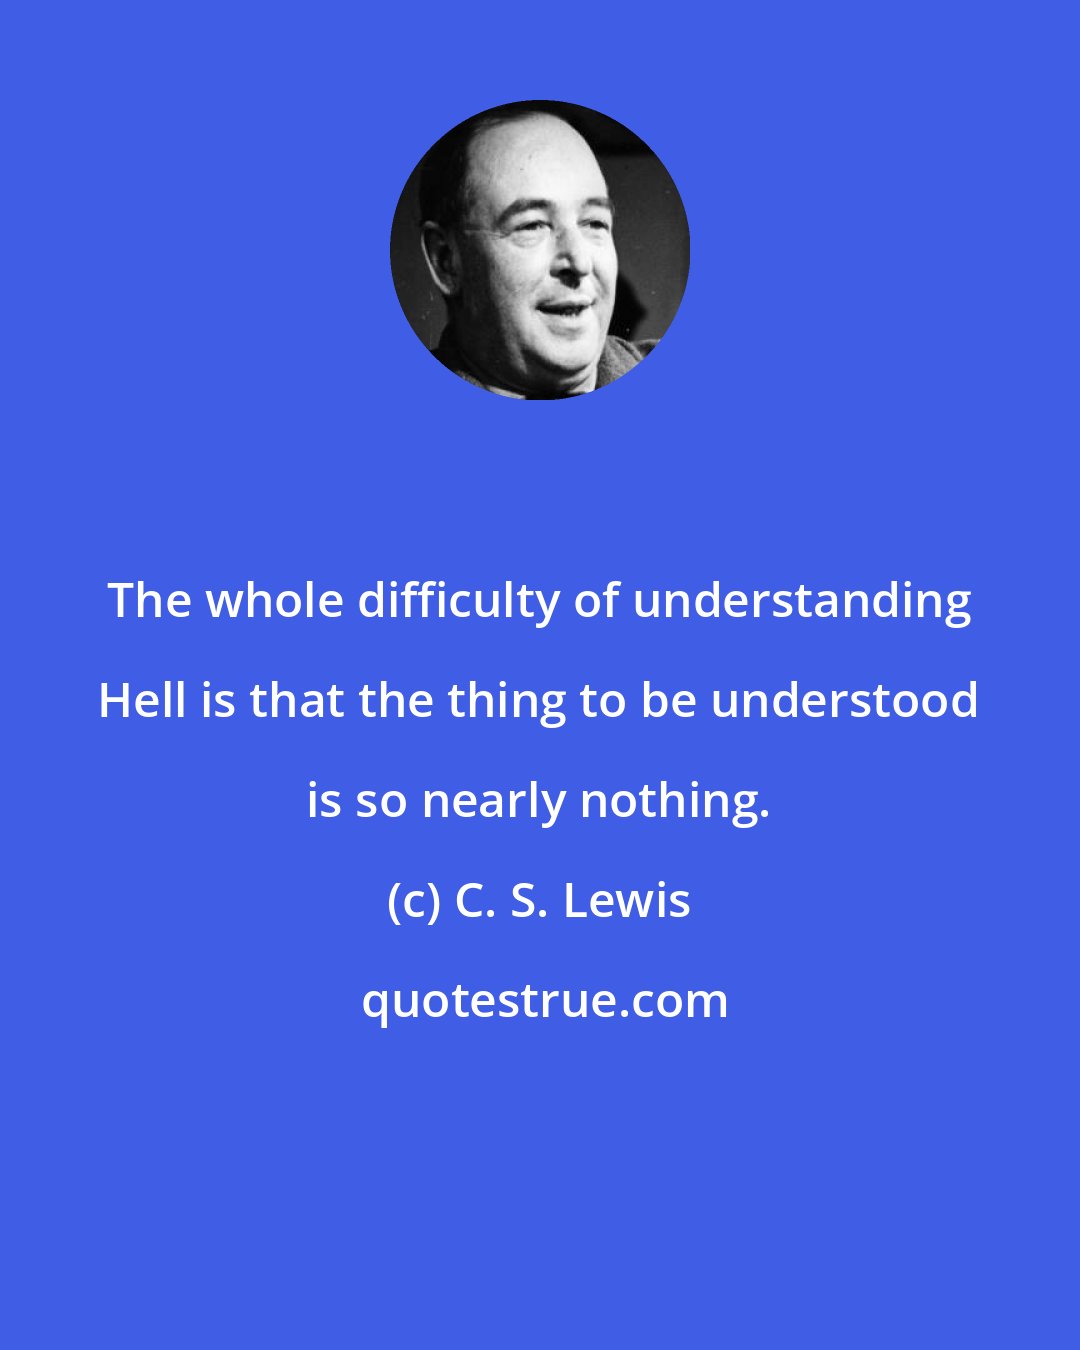 C. S. Lewis: The whole difficulty of understanding Hell is that the thing to be understood is so nearly nothing.